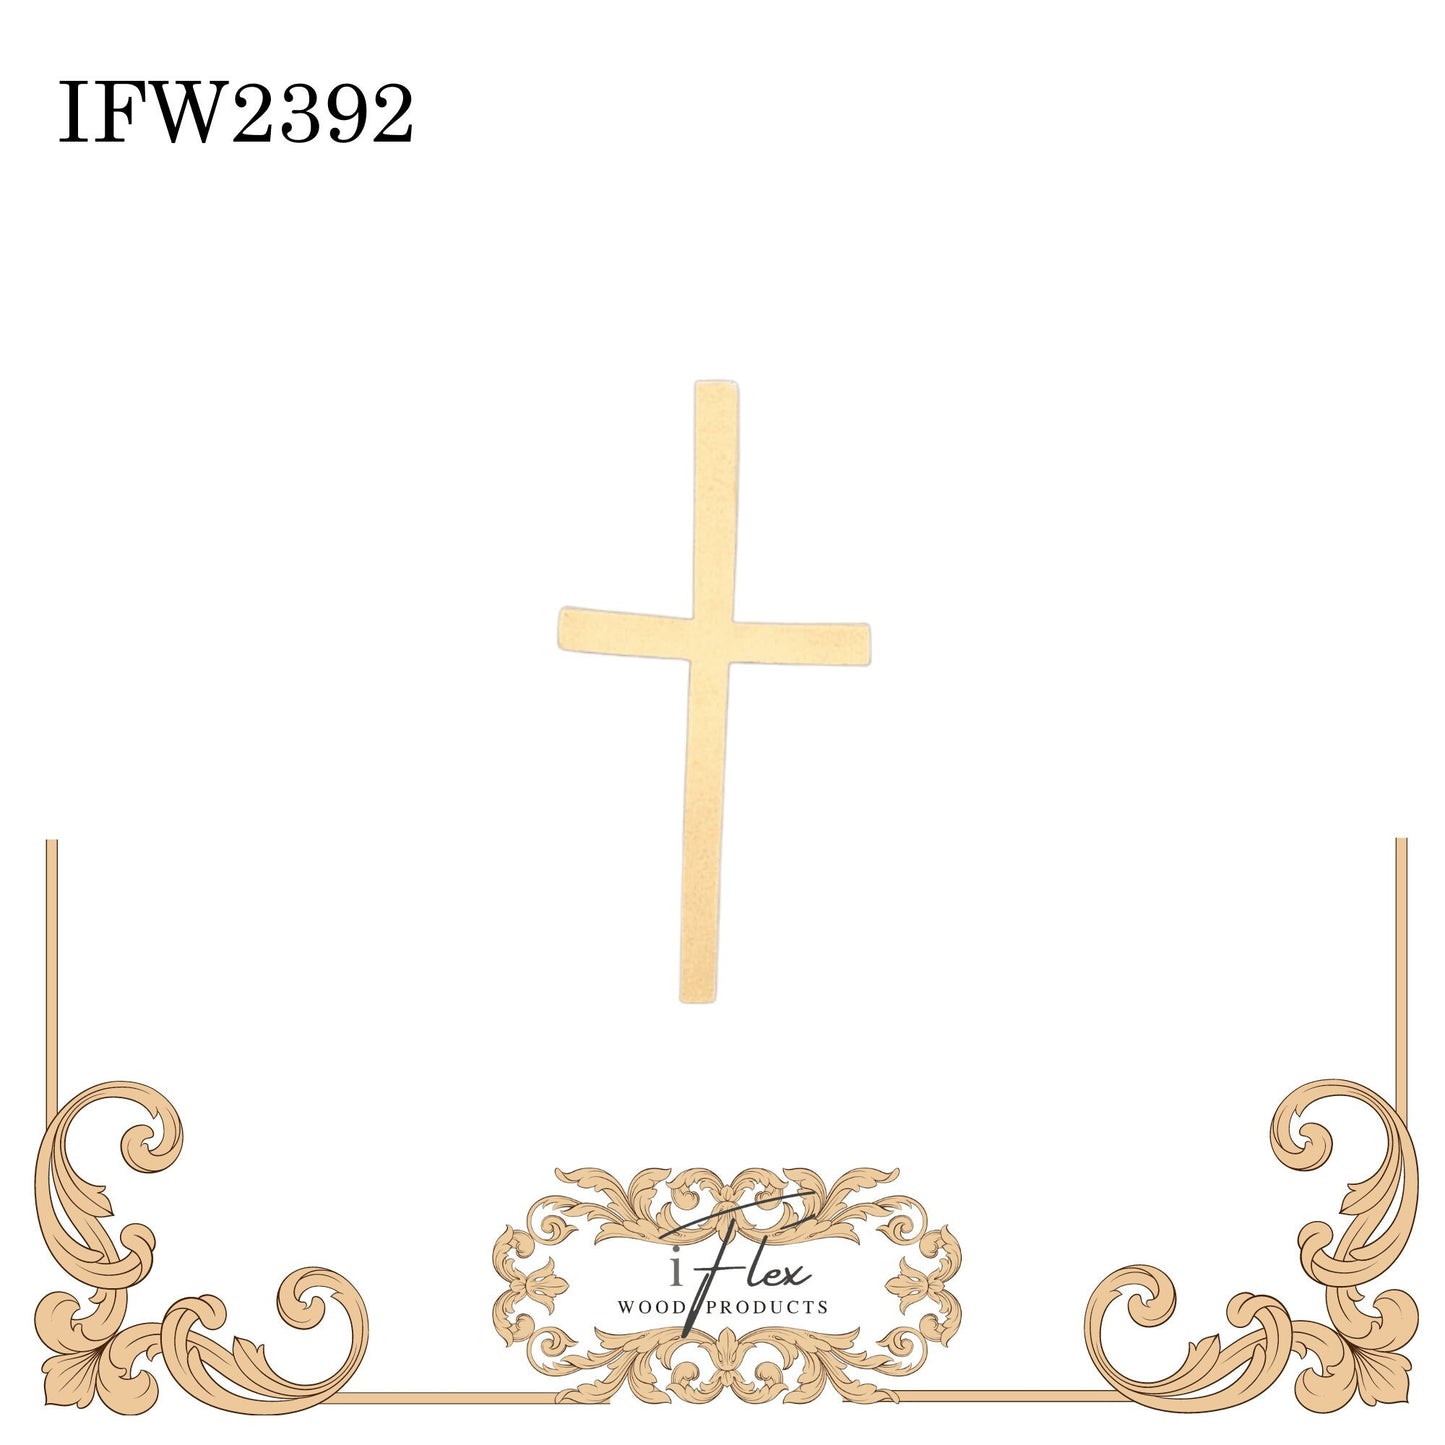 IFW 2392 iFlex Wood Products, bendable mouldings, flexible, wooden appliques, cross, misc